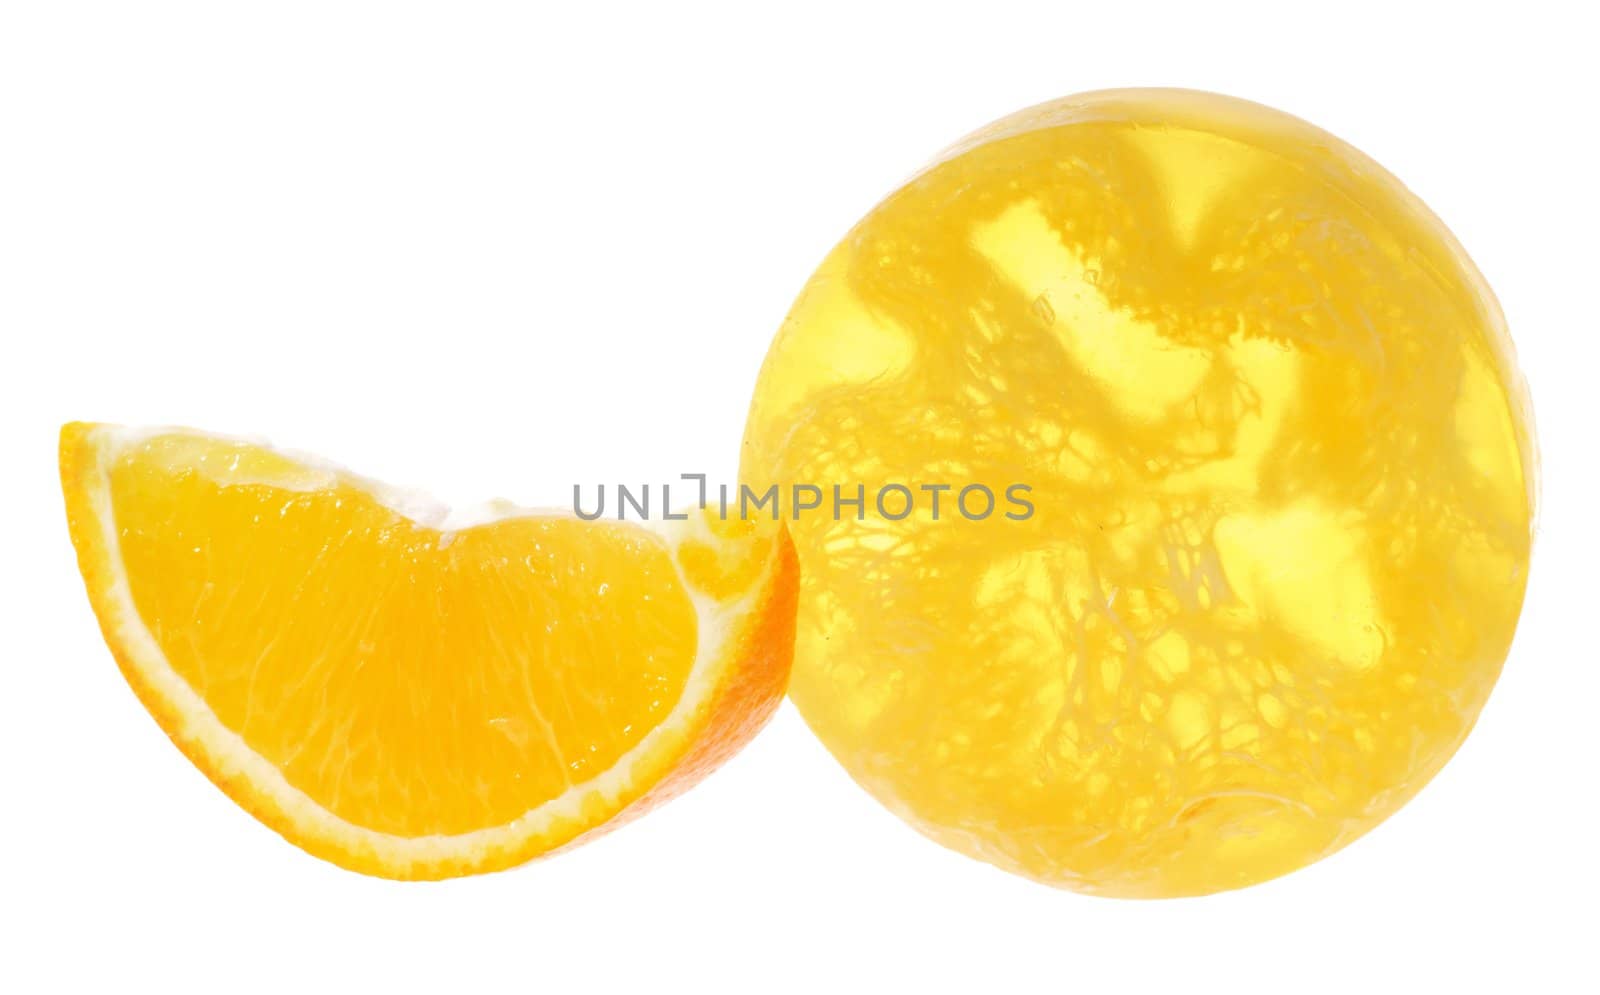 Juicy orange slices with scrubbing soap on white background